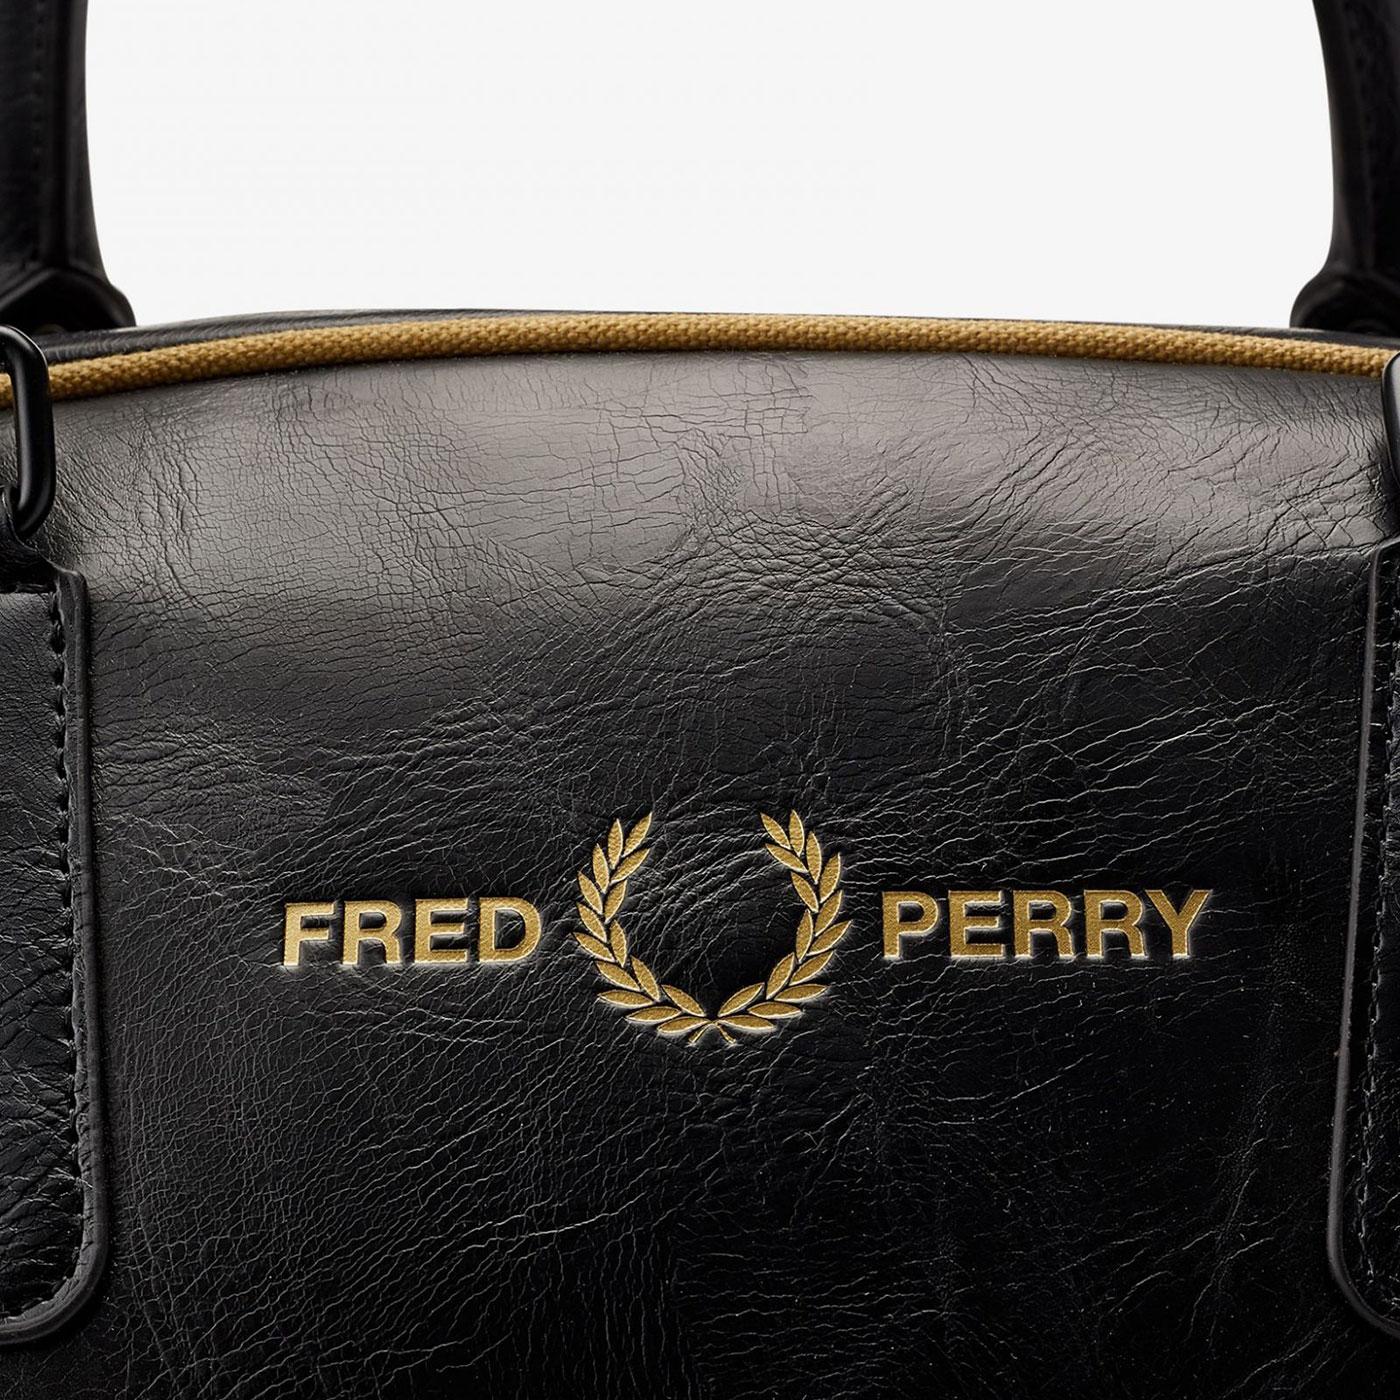 FRED PERRY Retro Sharp Refined Grip Weekend Bag in Black